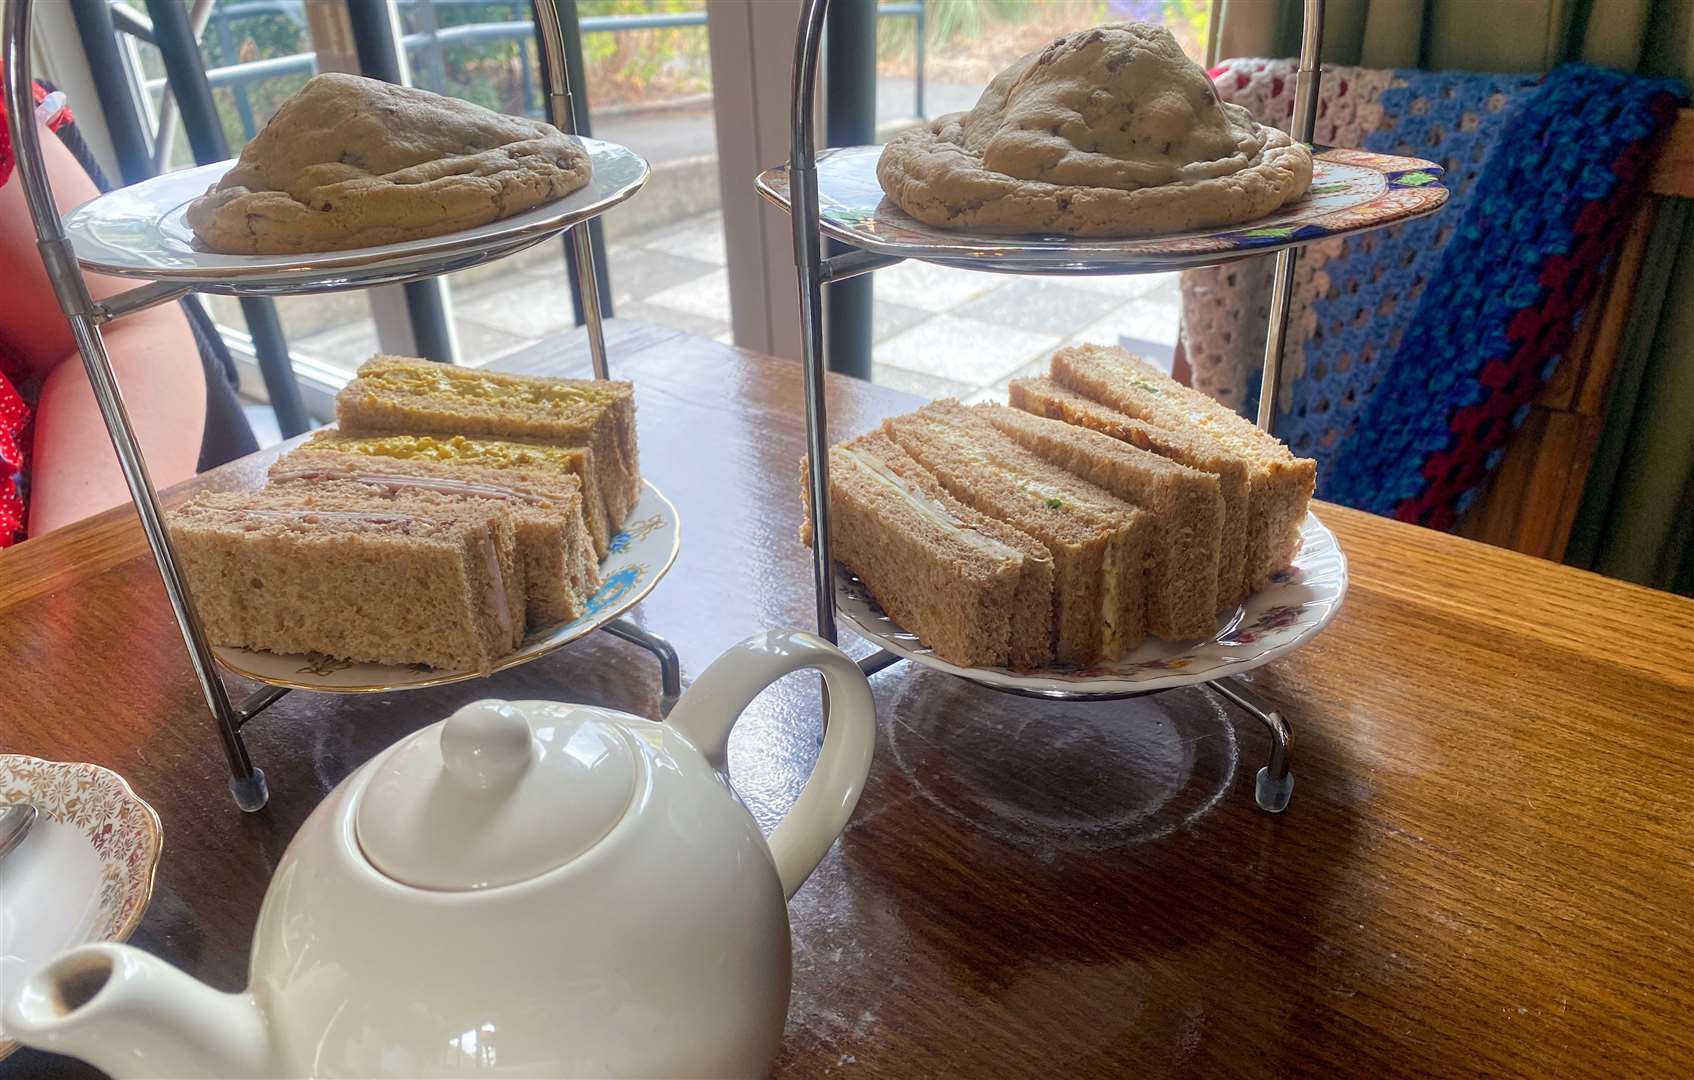 The 'short stack' afternoon tea came with four finger sandwiches, a huge cake and unlimited hot drinks